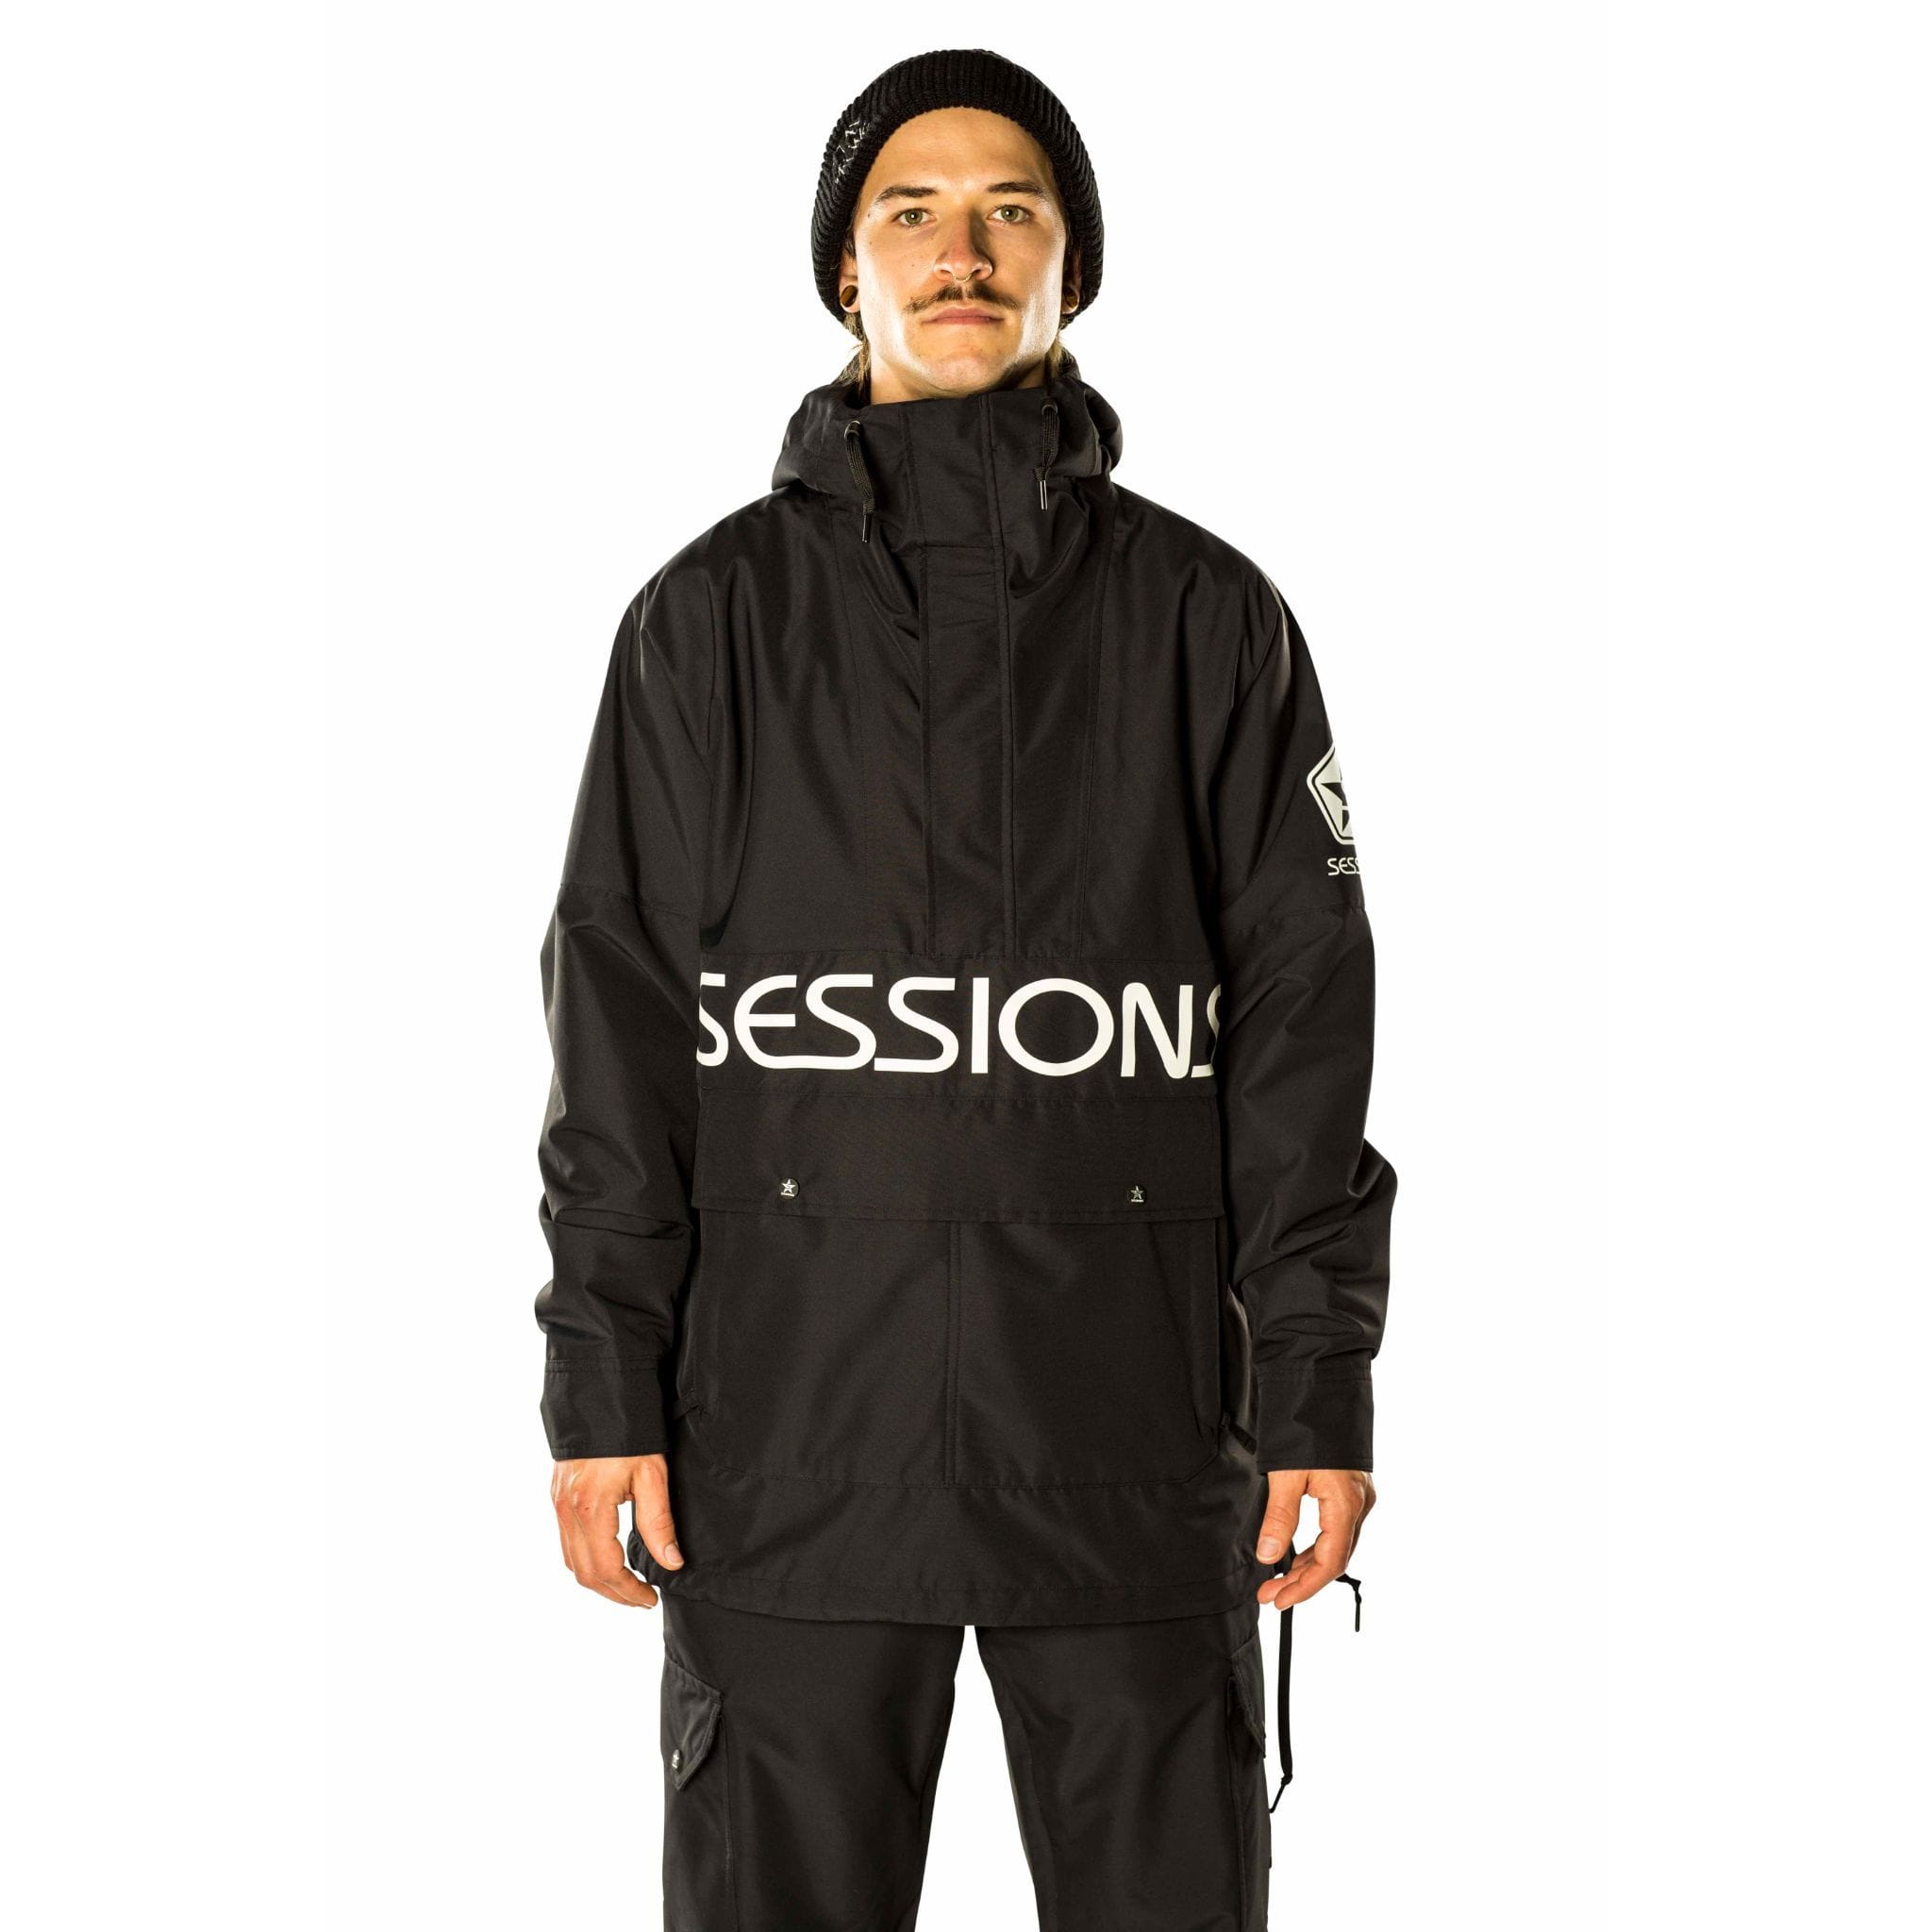 Sessions Chaos Pullover Jacket